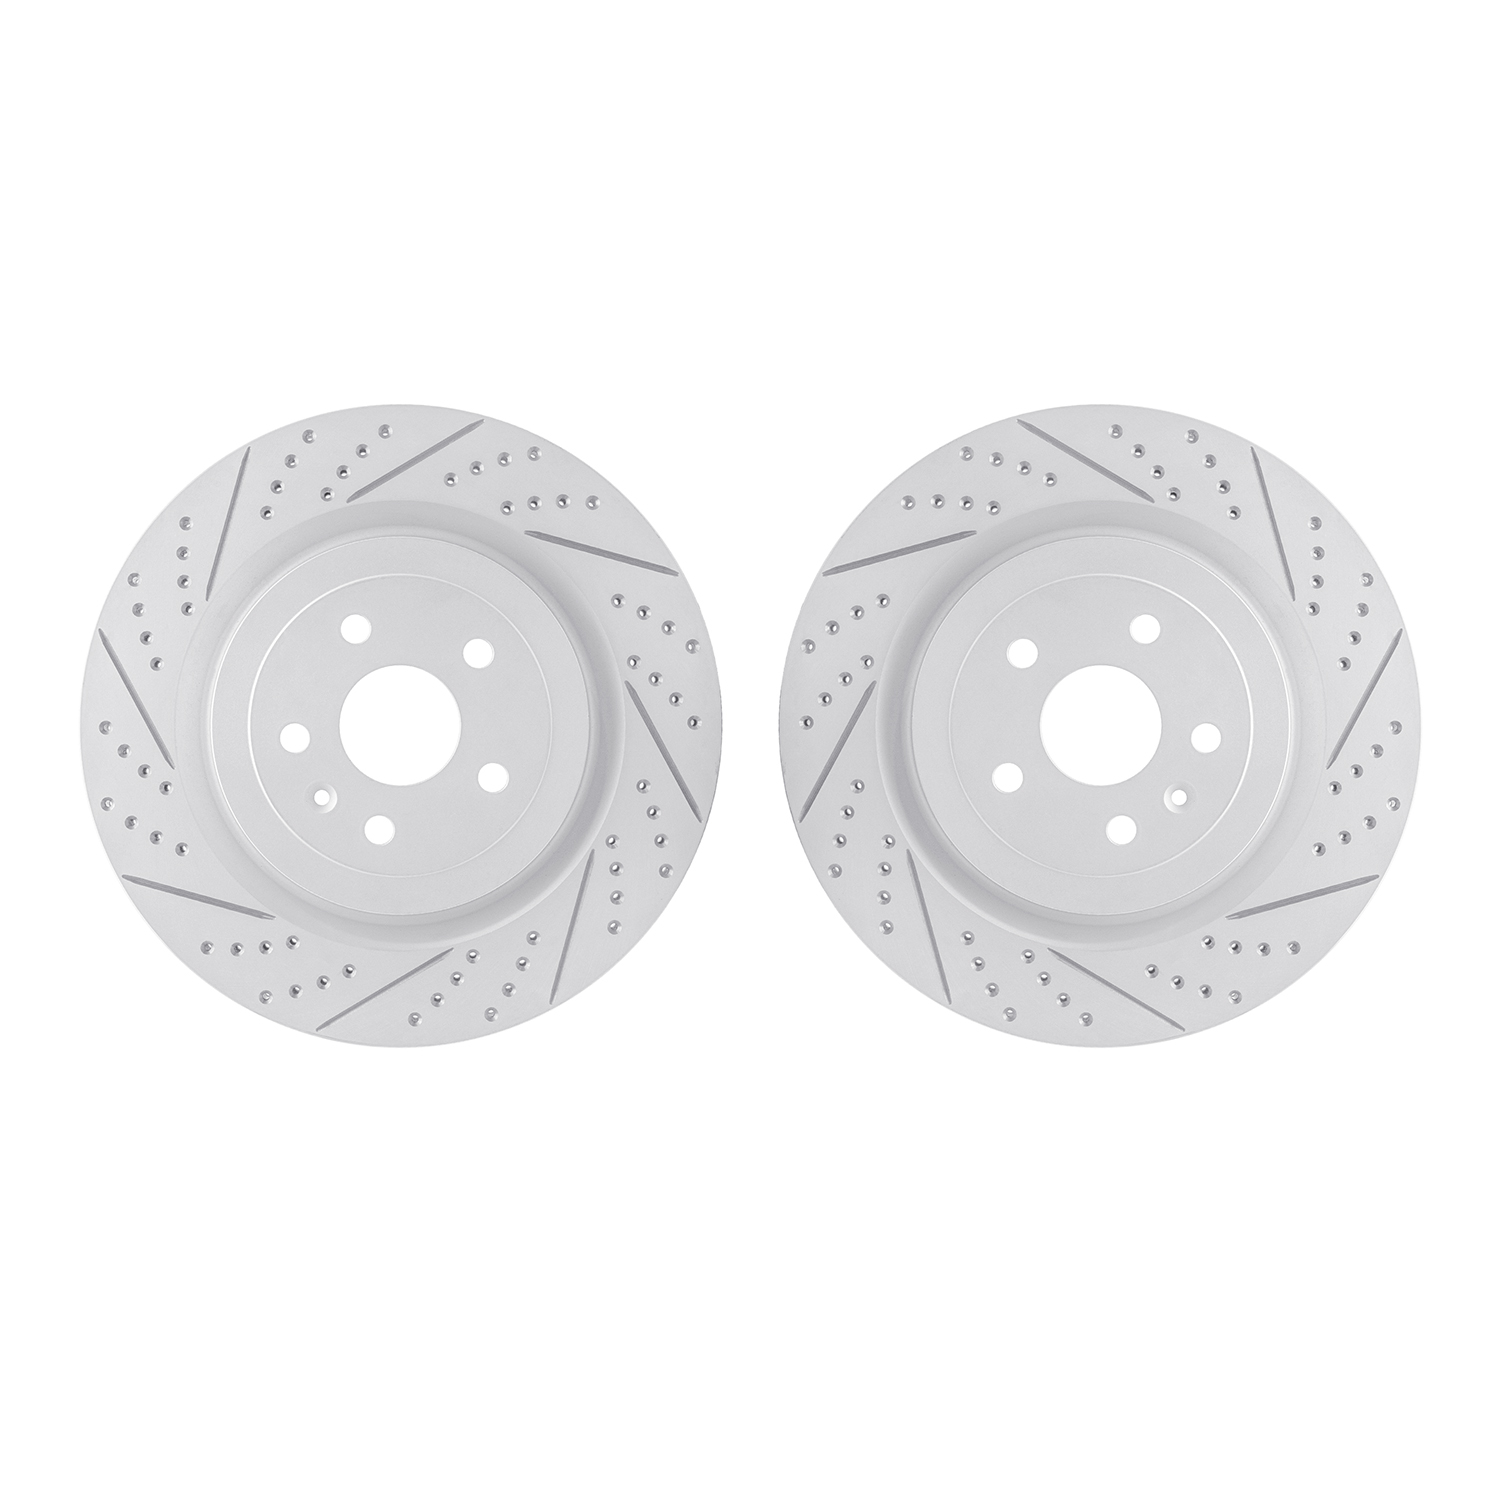 2002-47035 Geoperformance Drilled/Slotted Brake Rotors, Fits Select GM, Position: Rear